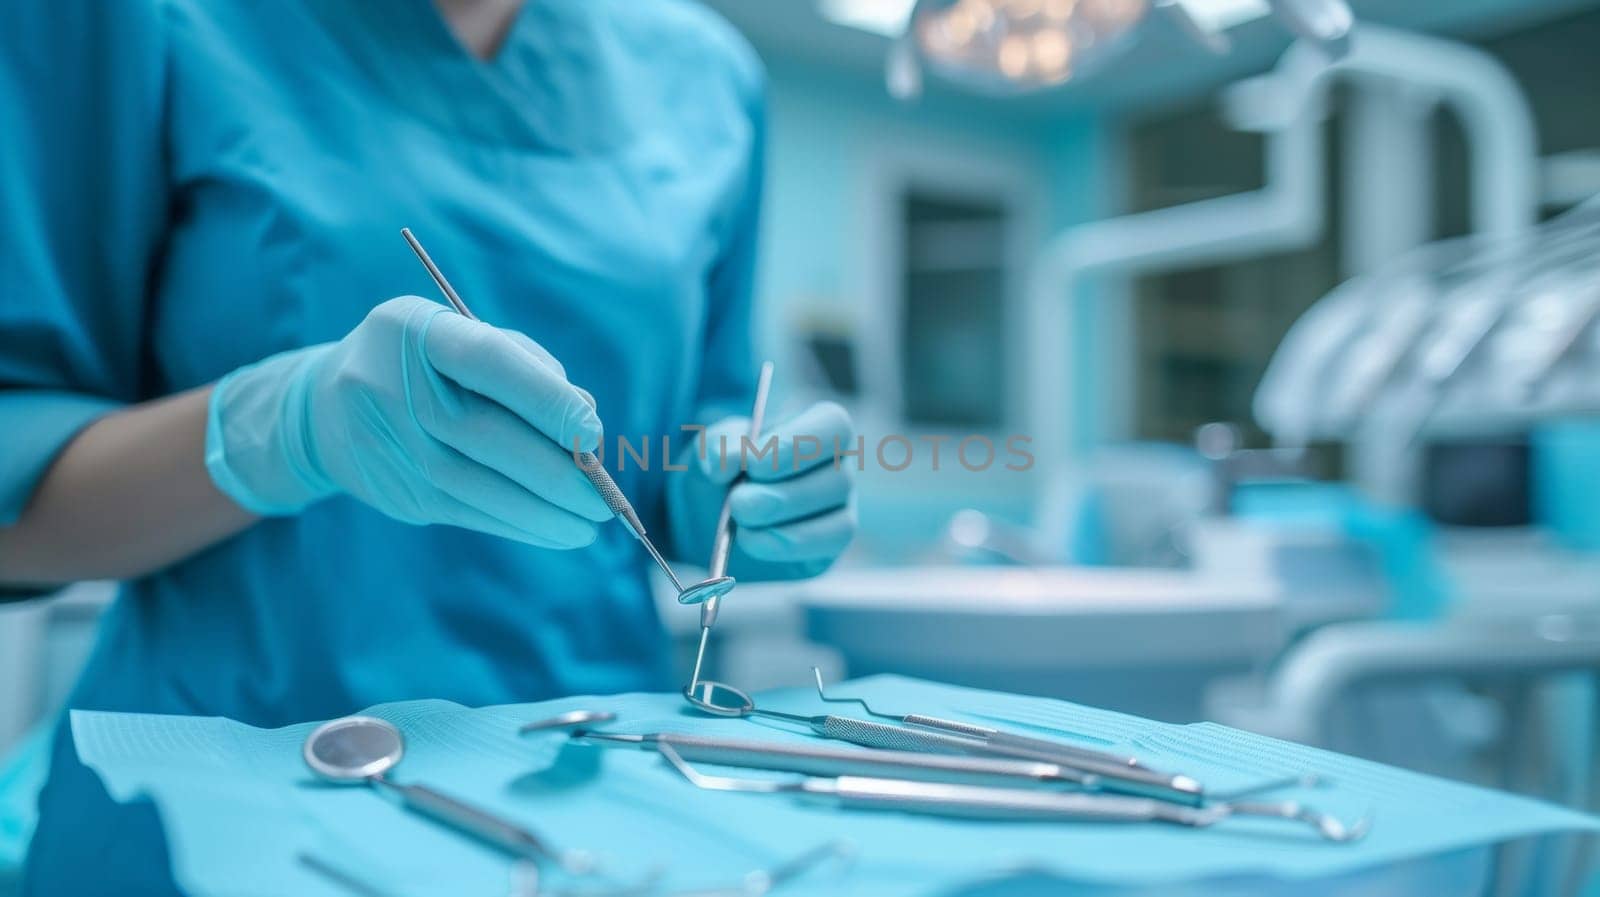 A person in blue scrubs holding a pair of scissors and dental tools